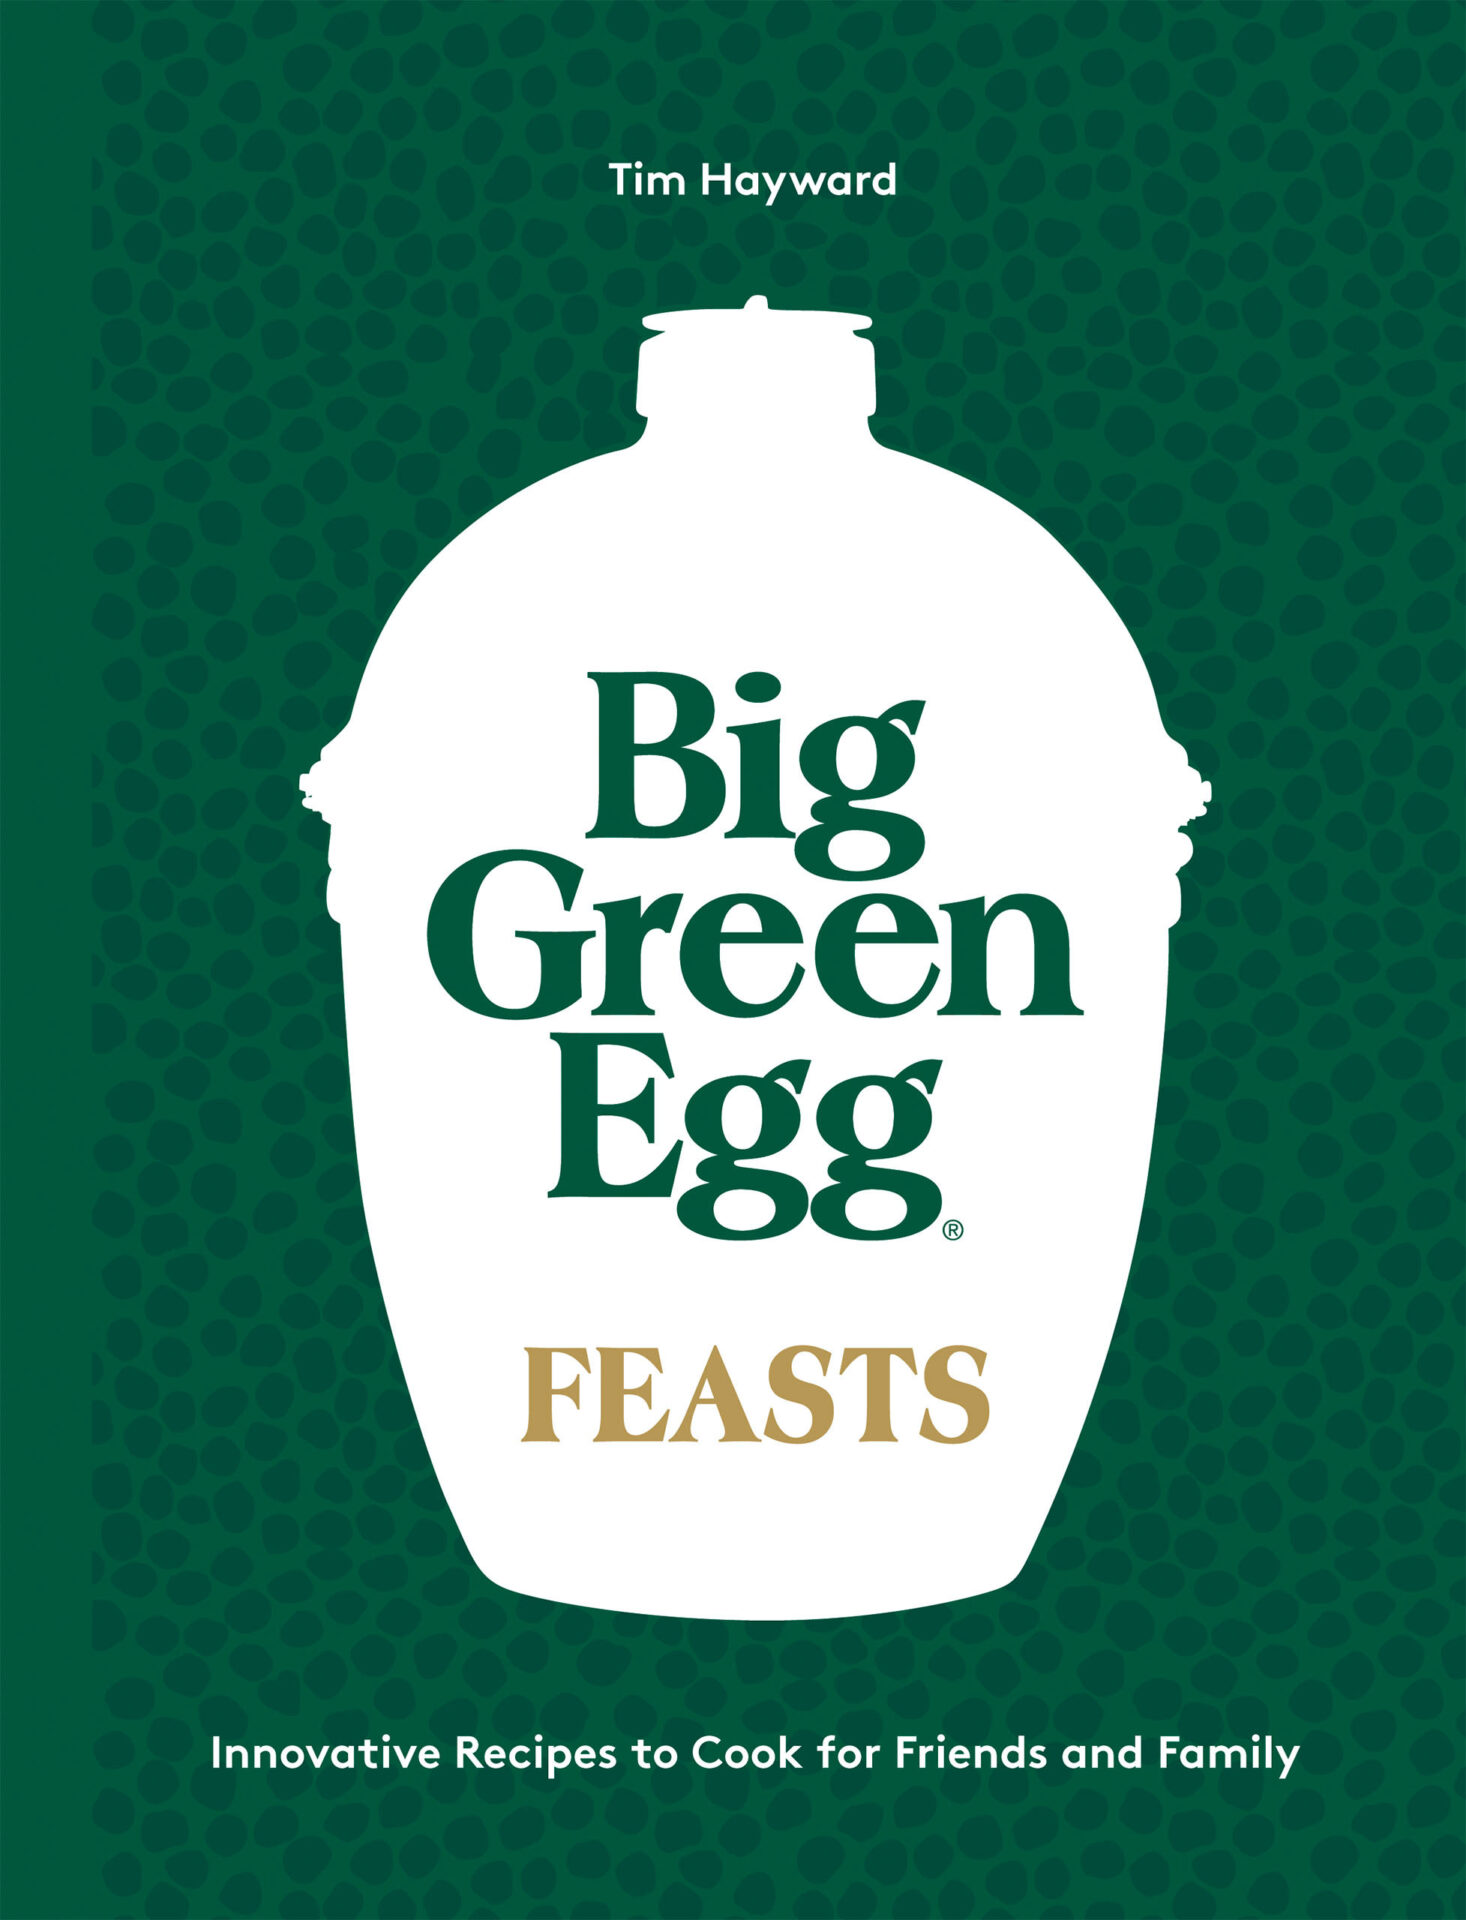 Big Green Egg Feasts Cookbook cover, one of the best southern cookbooks of the summer